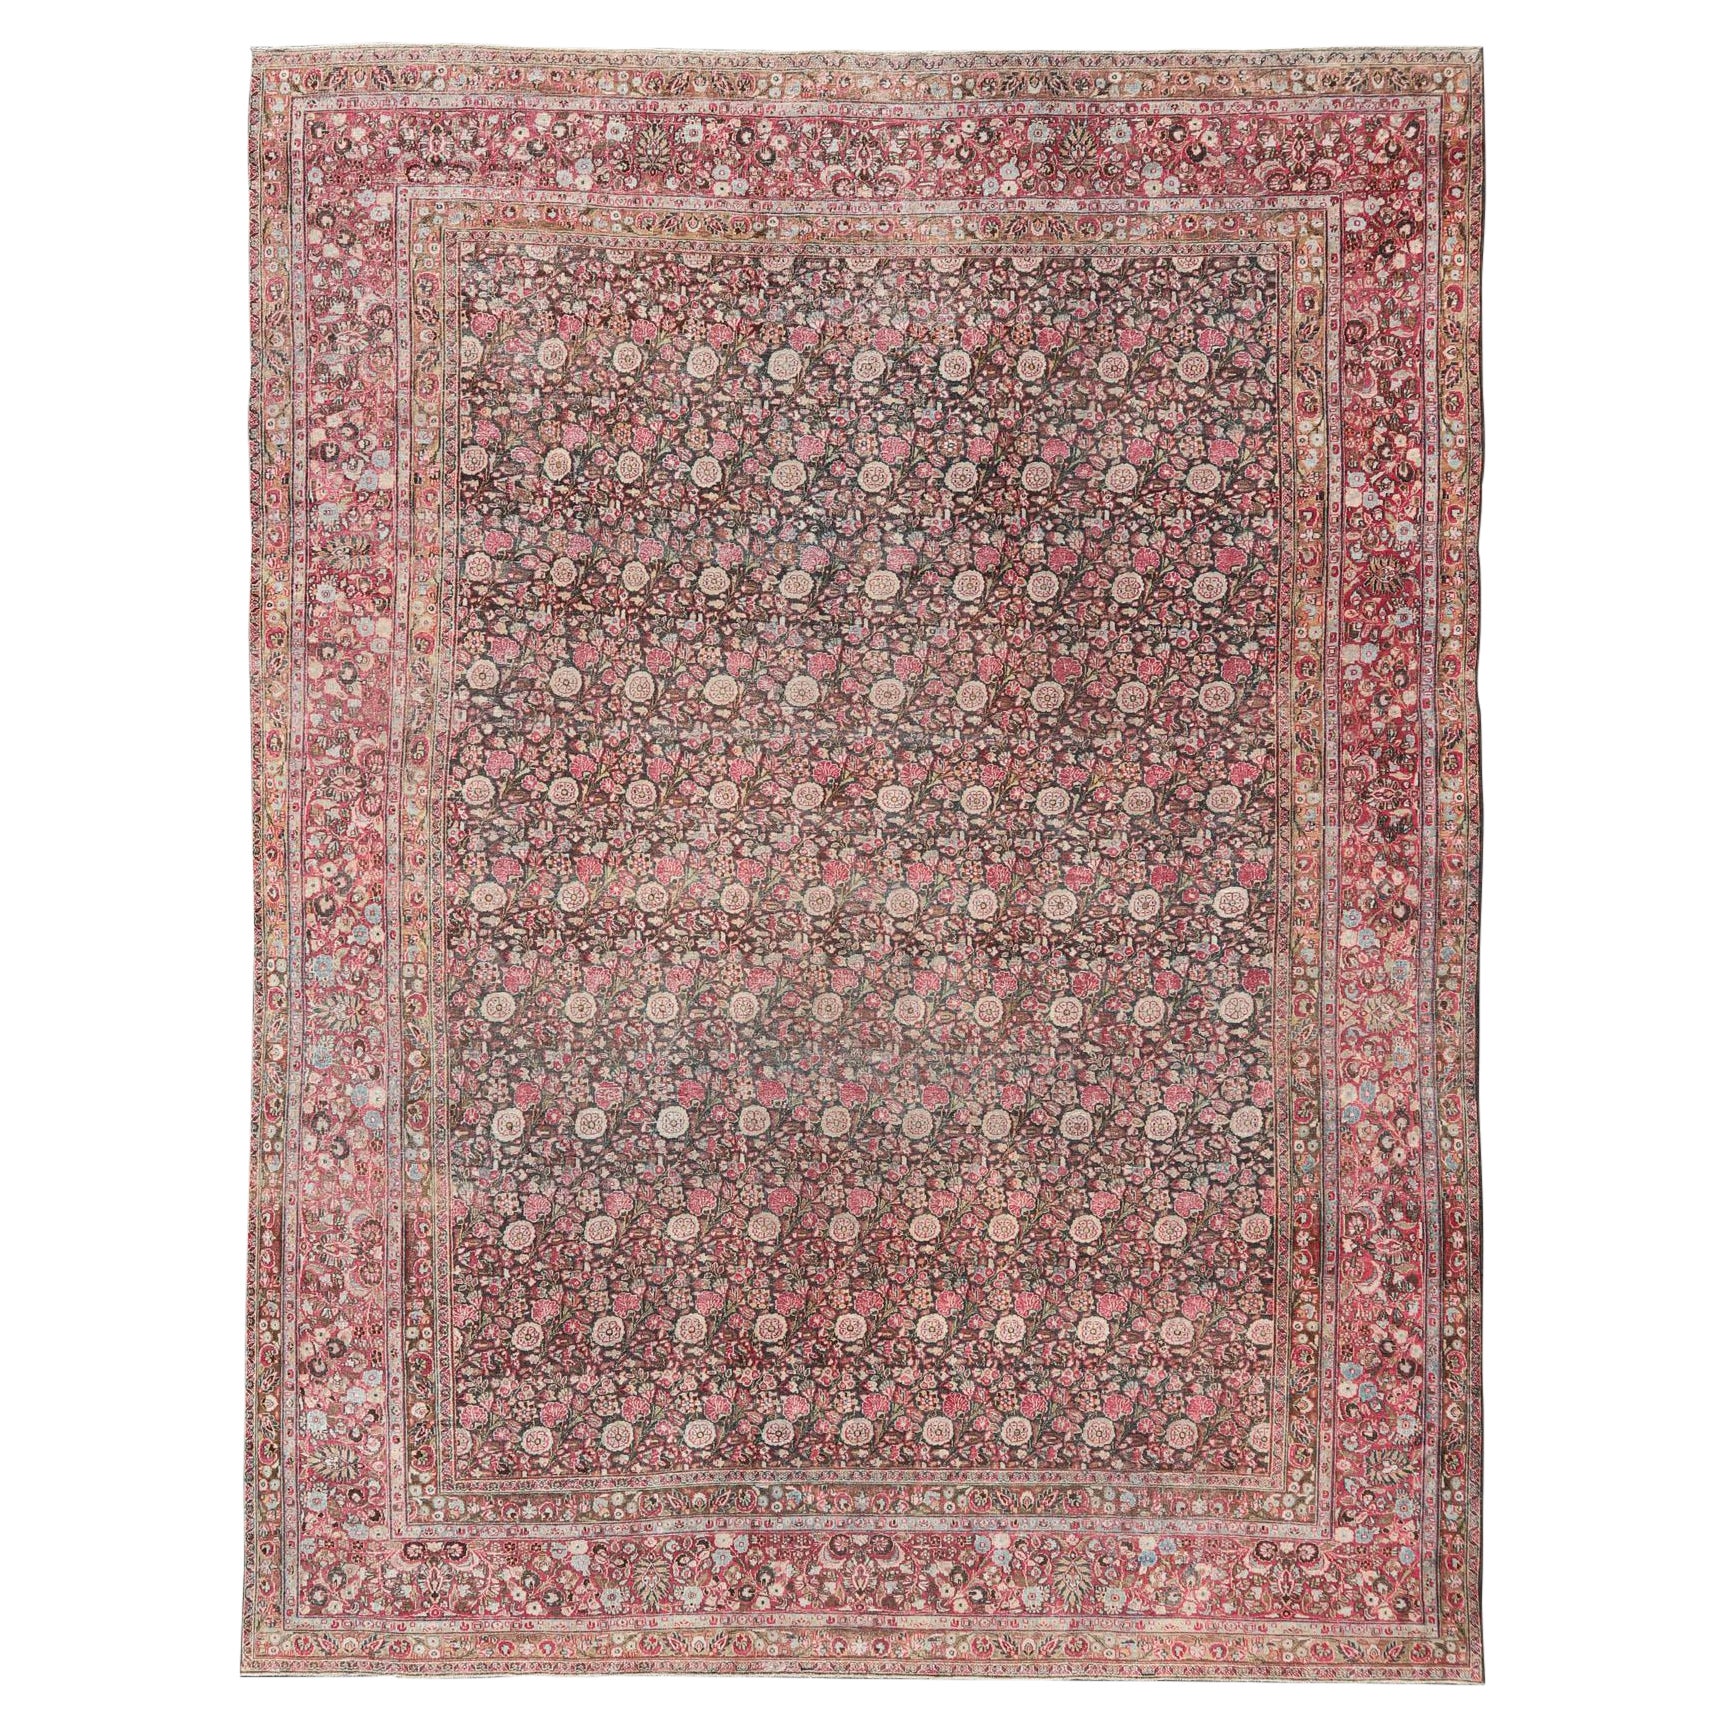 Antique Persian Khorasan Rug with Floral Design in Charcoal, Brown & Rose Red